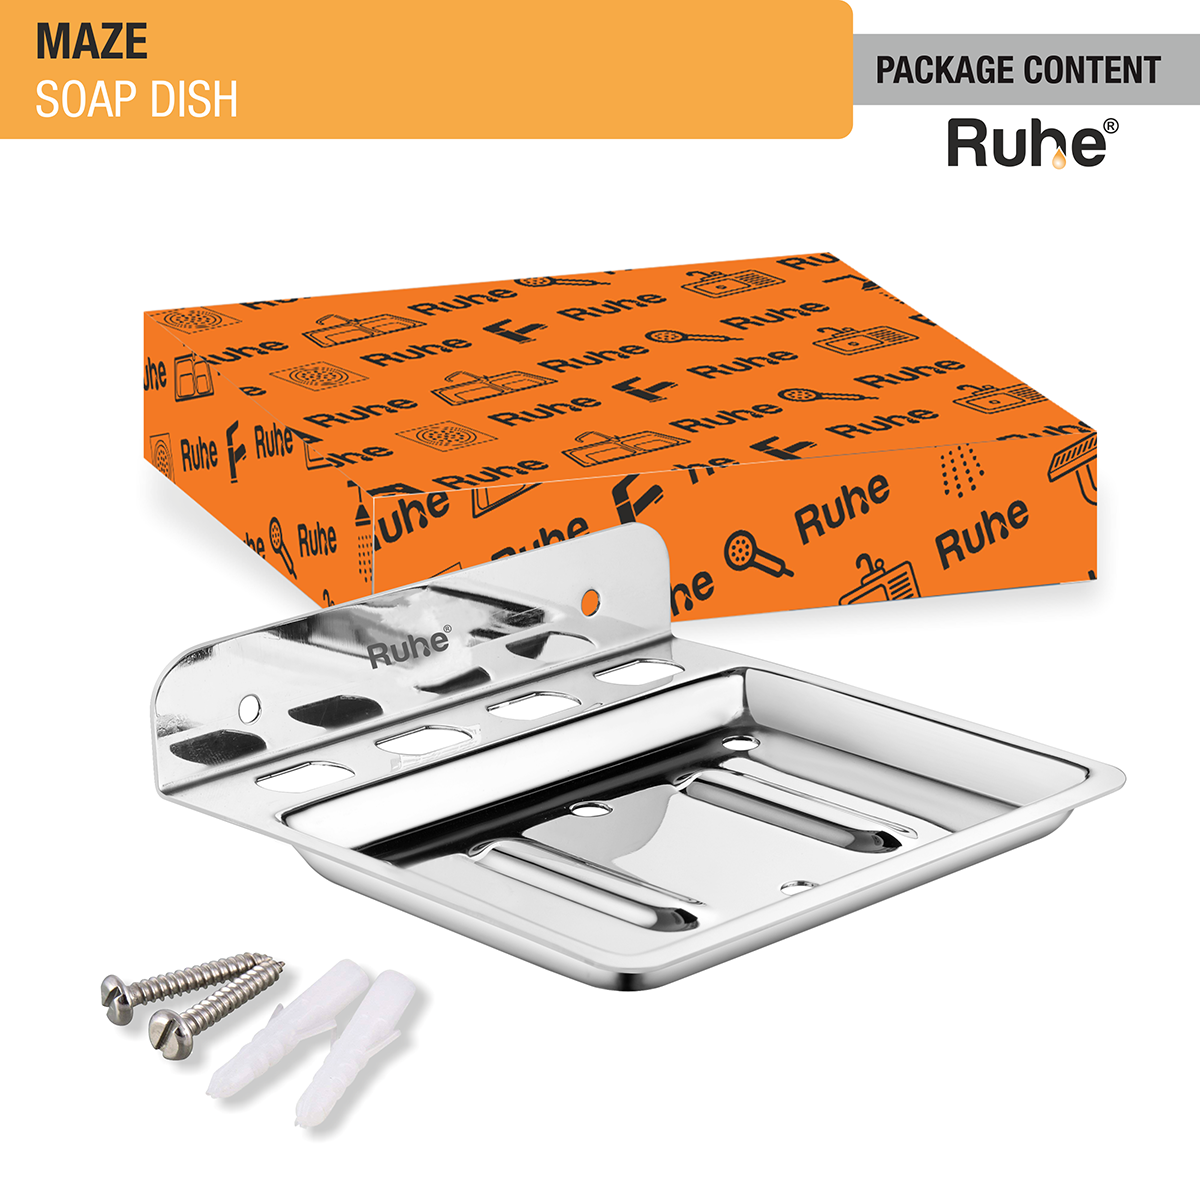 Maze Stainless Steel Soap Dish package content